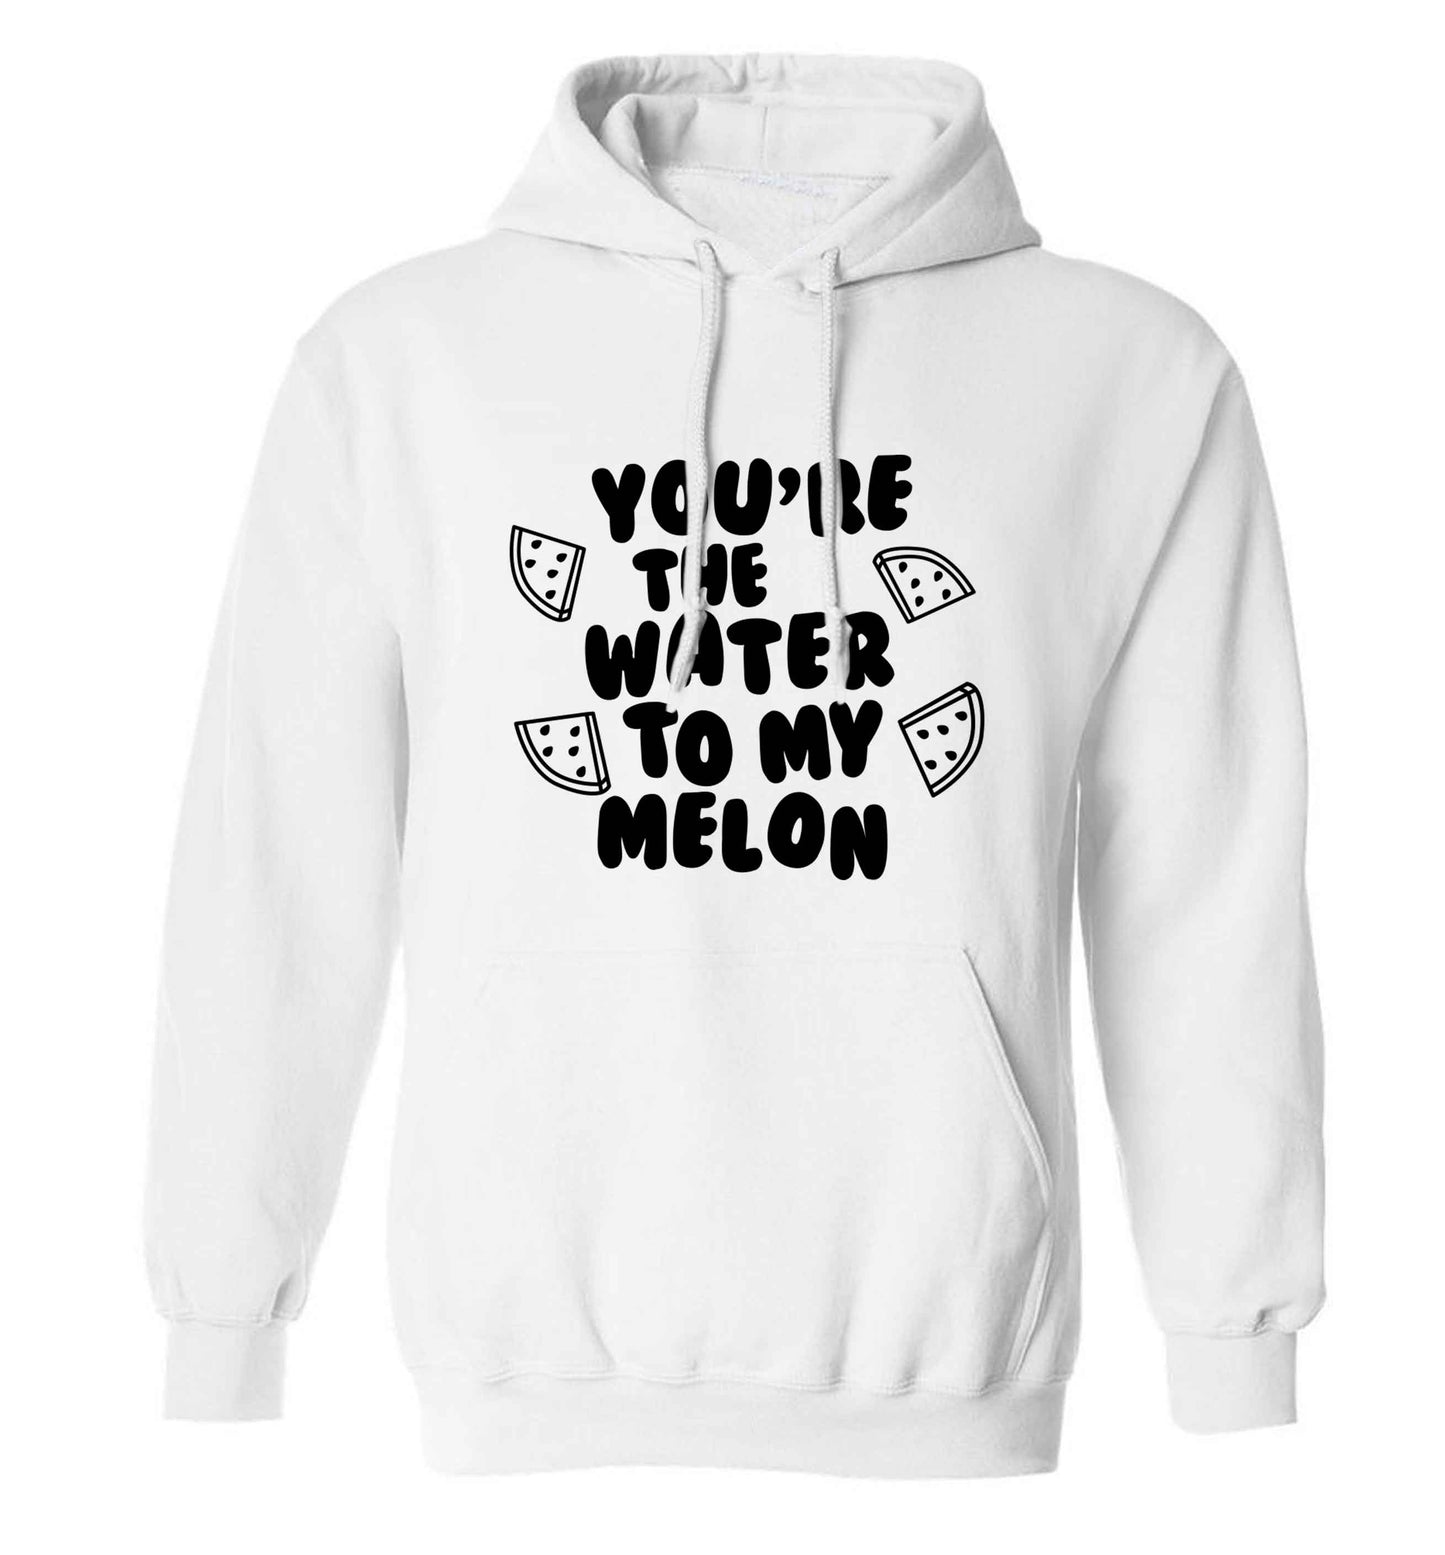 You're the water to my melon adults unisex white hoodie 2XL